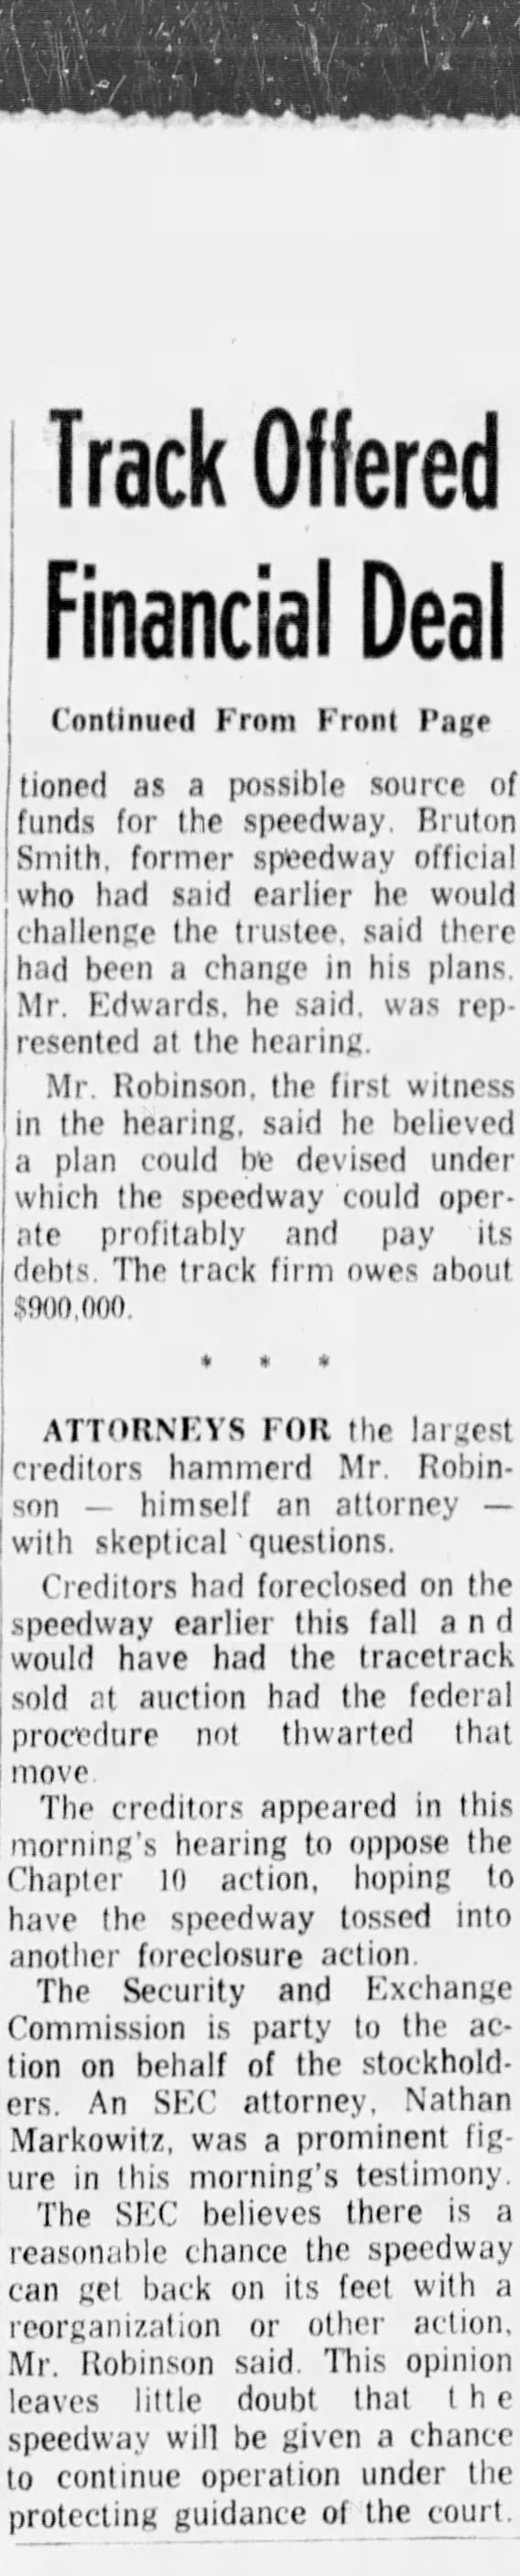 $650,000 Offered To Ailing Raceway (Part 2)